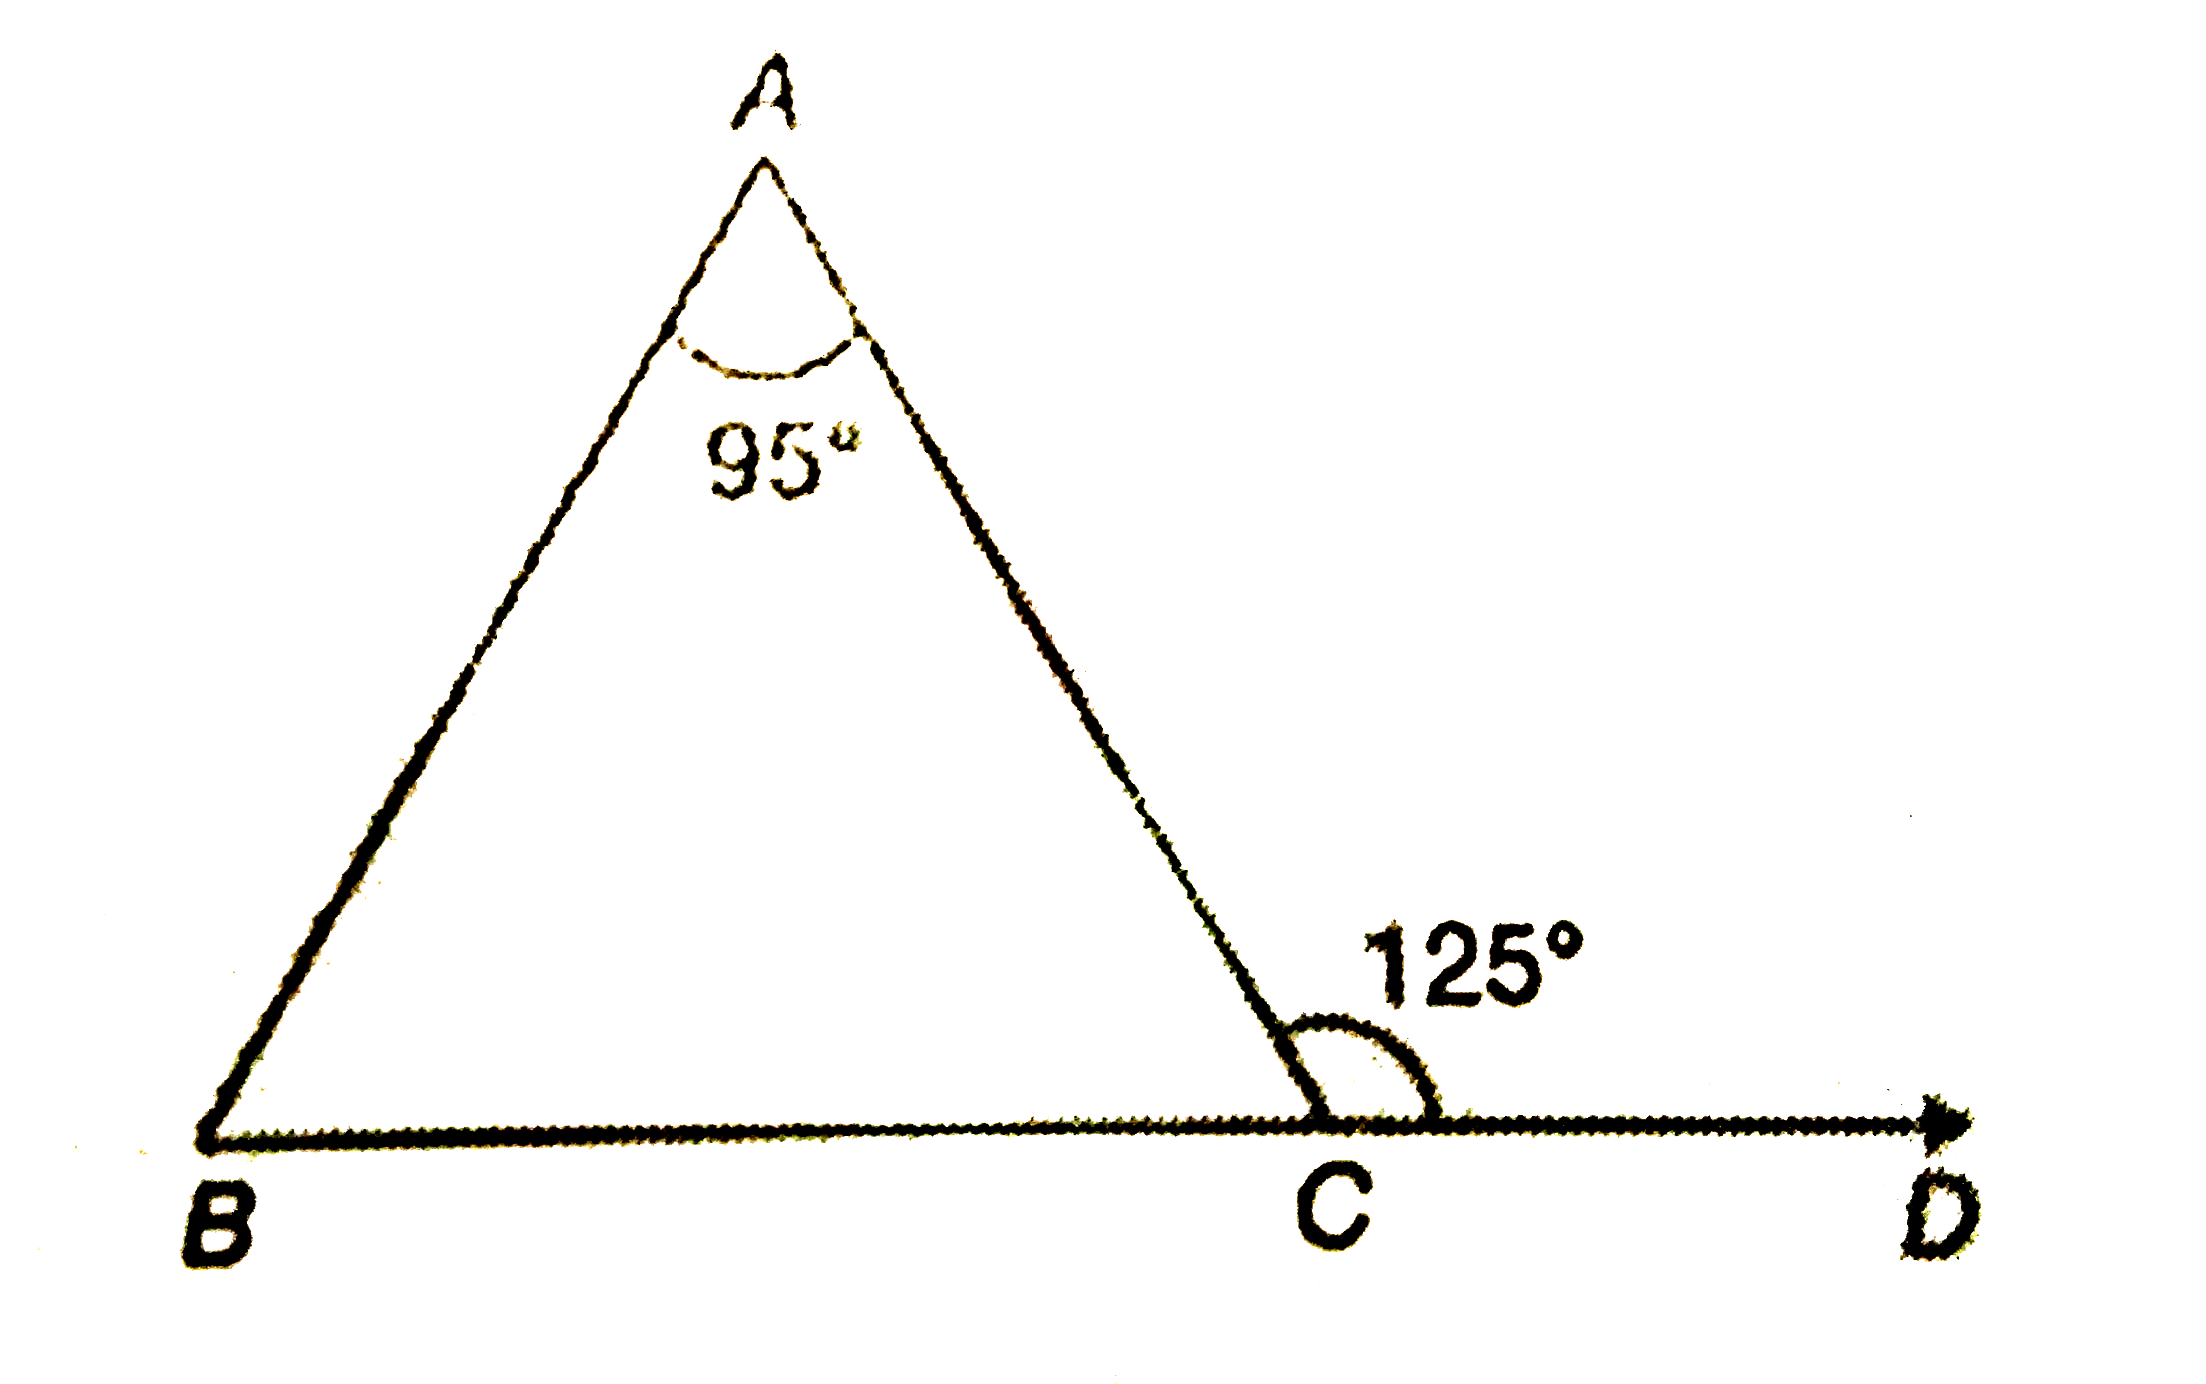 In the given figure, C is a point on the line segment BD. Find the measurements of angleACB and angleABC.